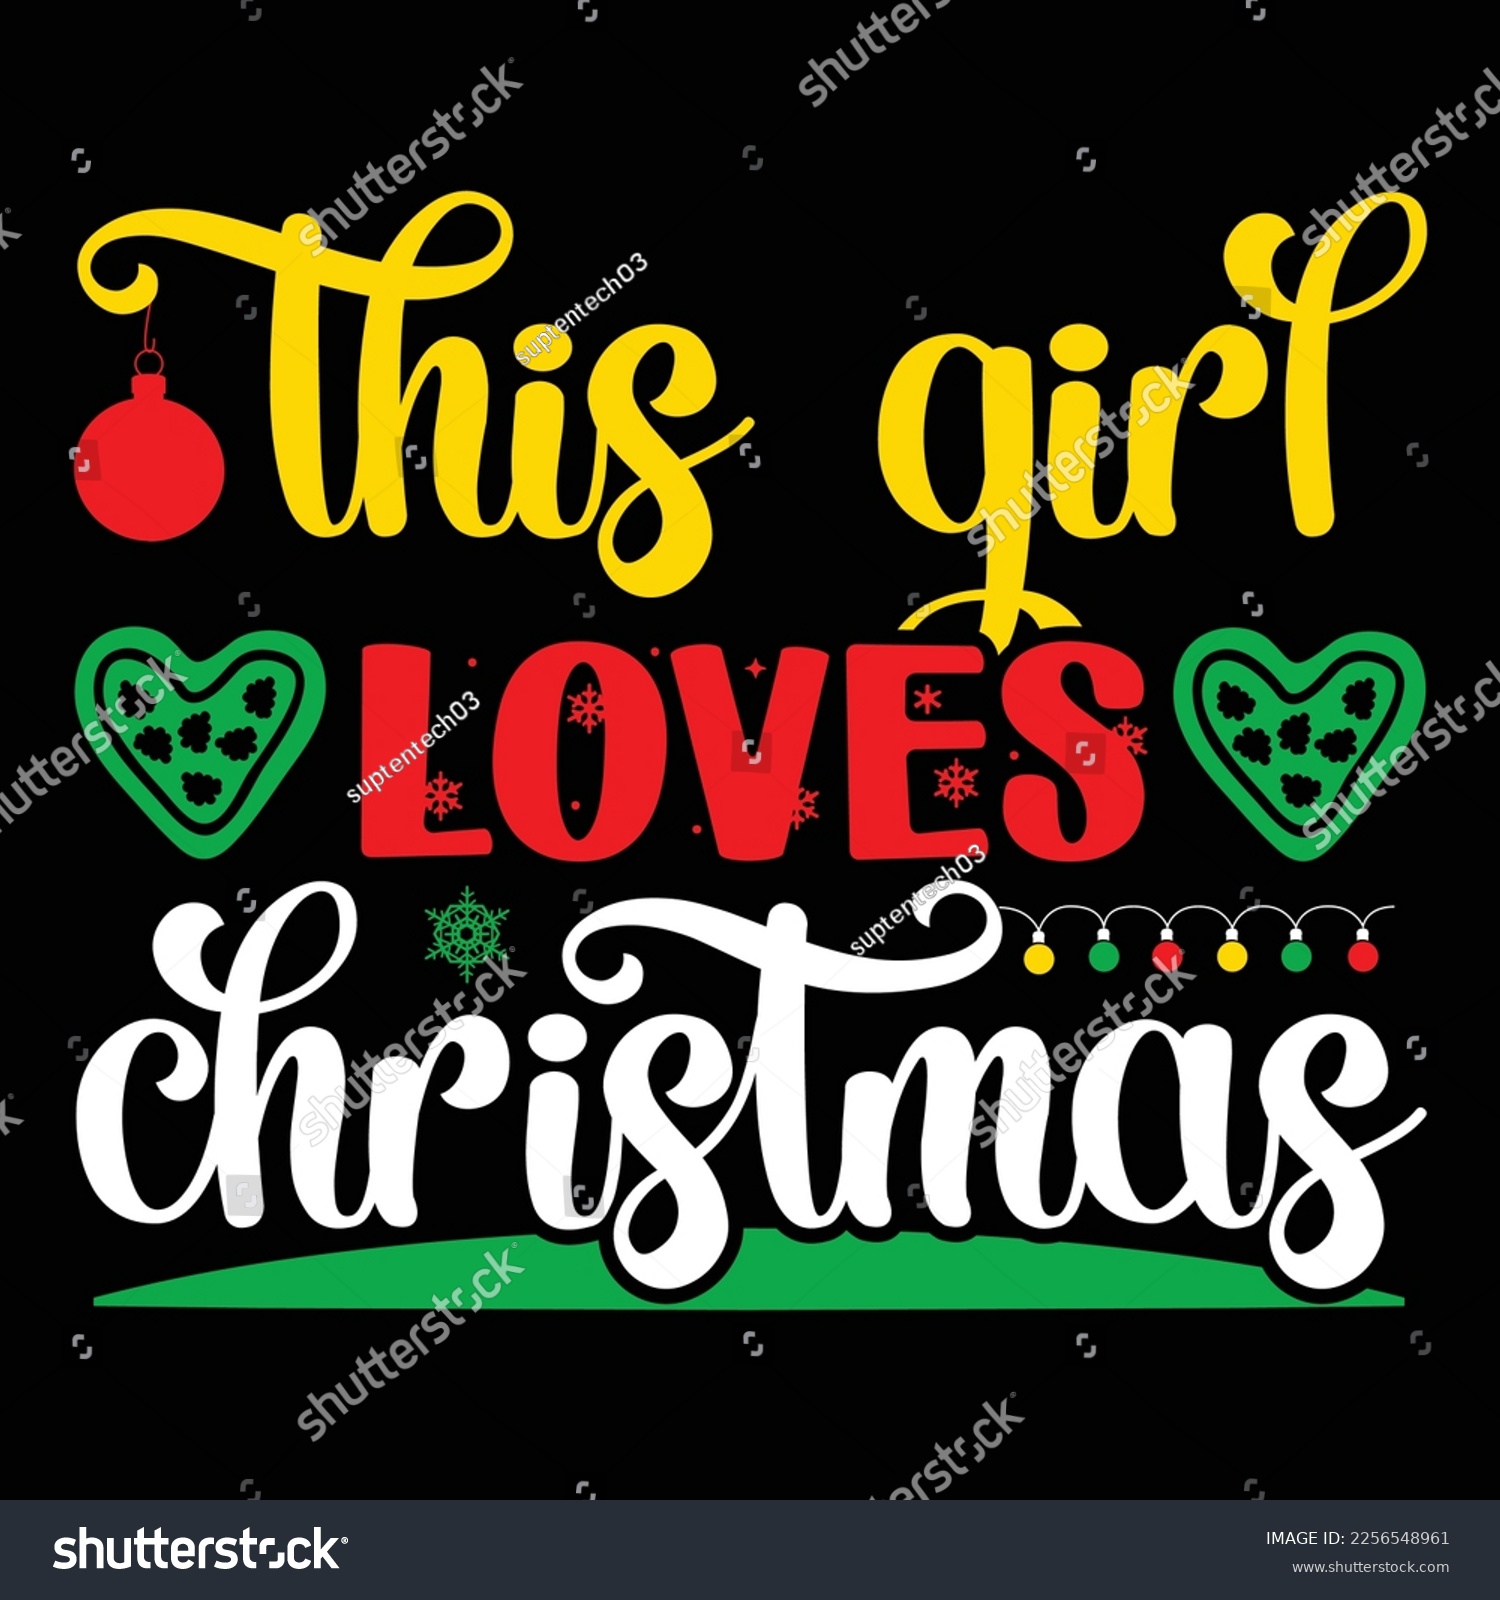 SVG of This Girls Loves Christmas, Merry Christmas shirts Print Template, Xmas Ugly Snow Santa Clouse New Year Holiday Candy Santa Hat vector illustration for Christmas hand lettered svg